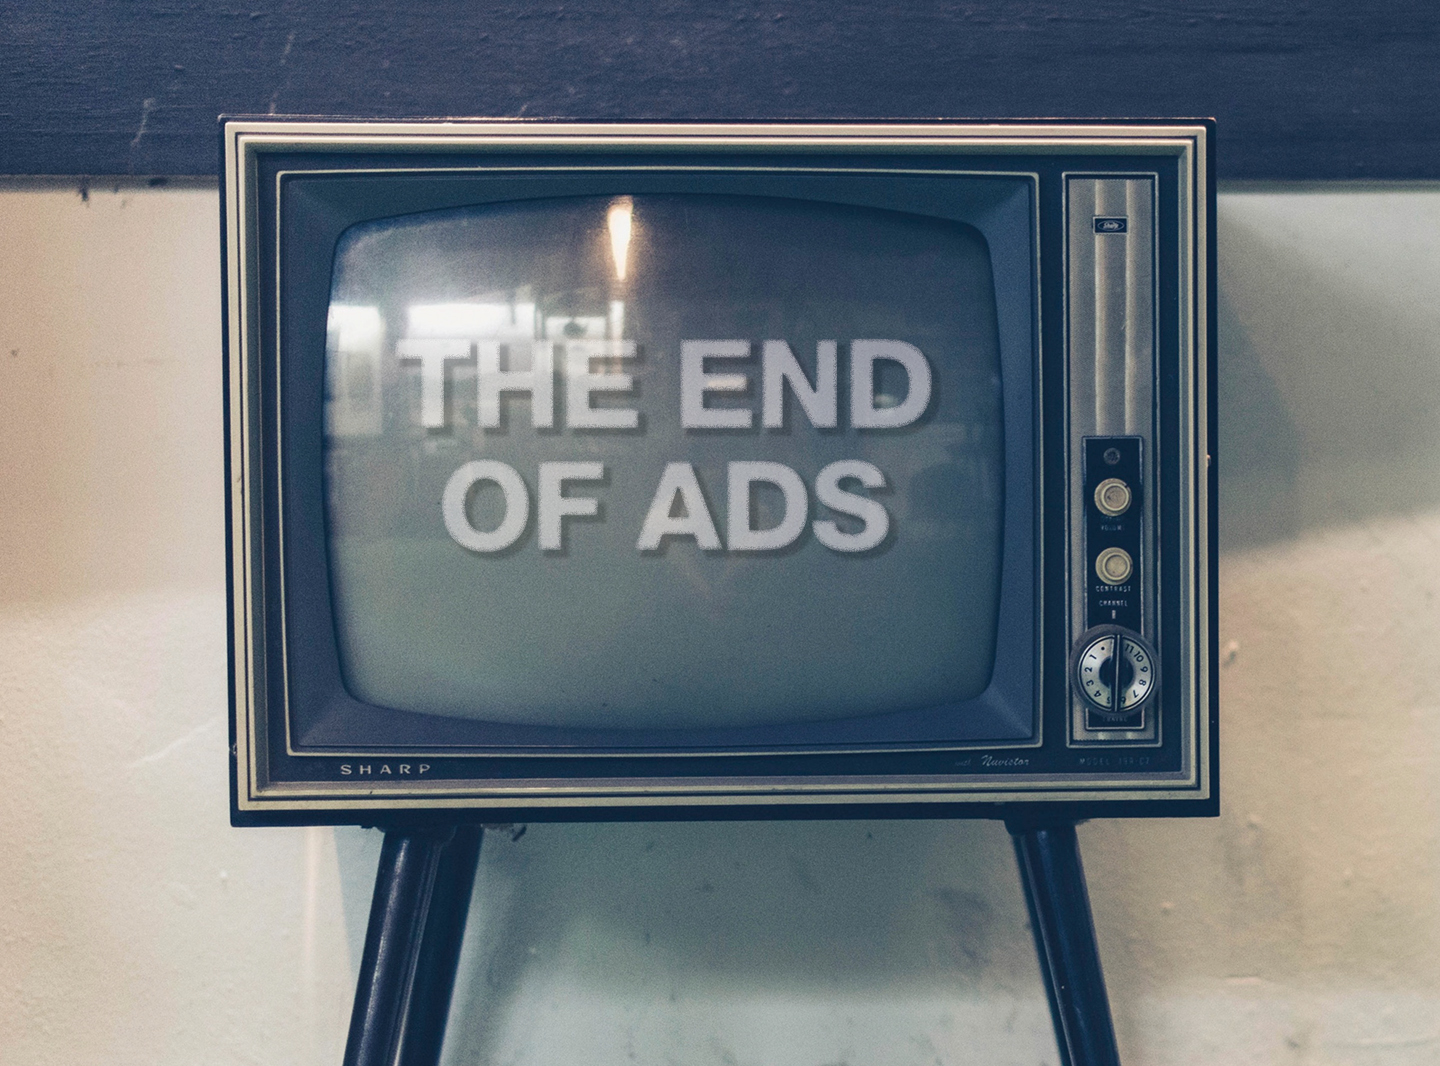 The end of ads image